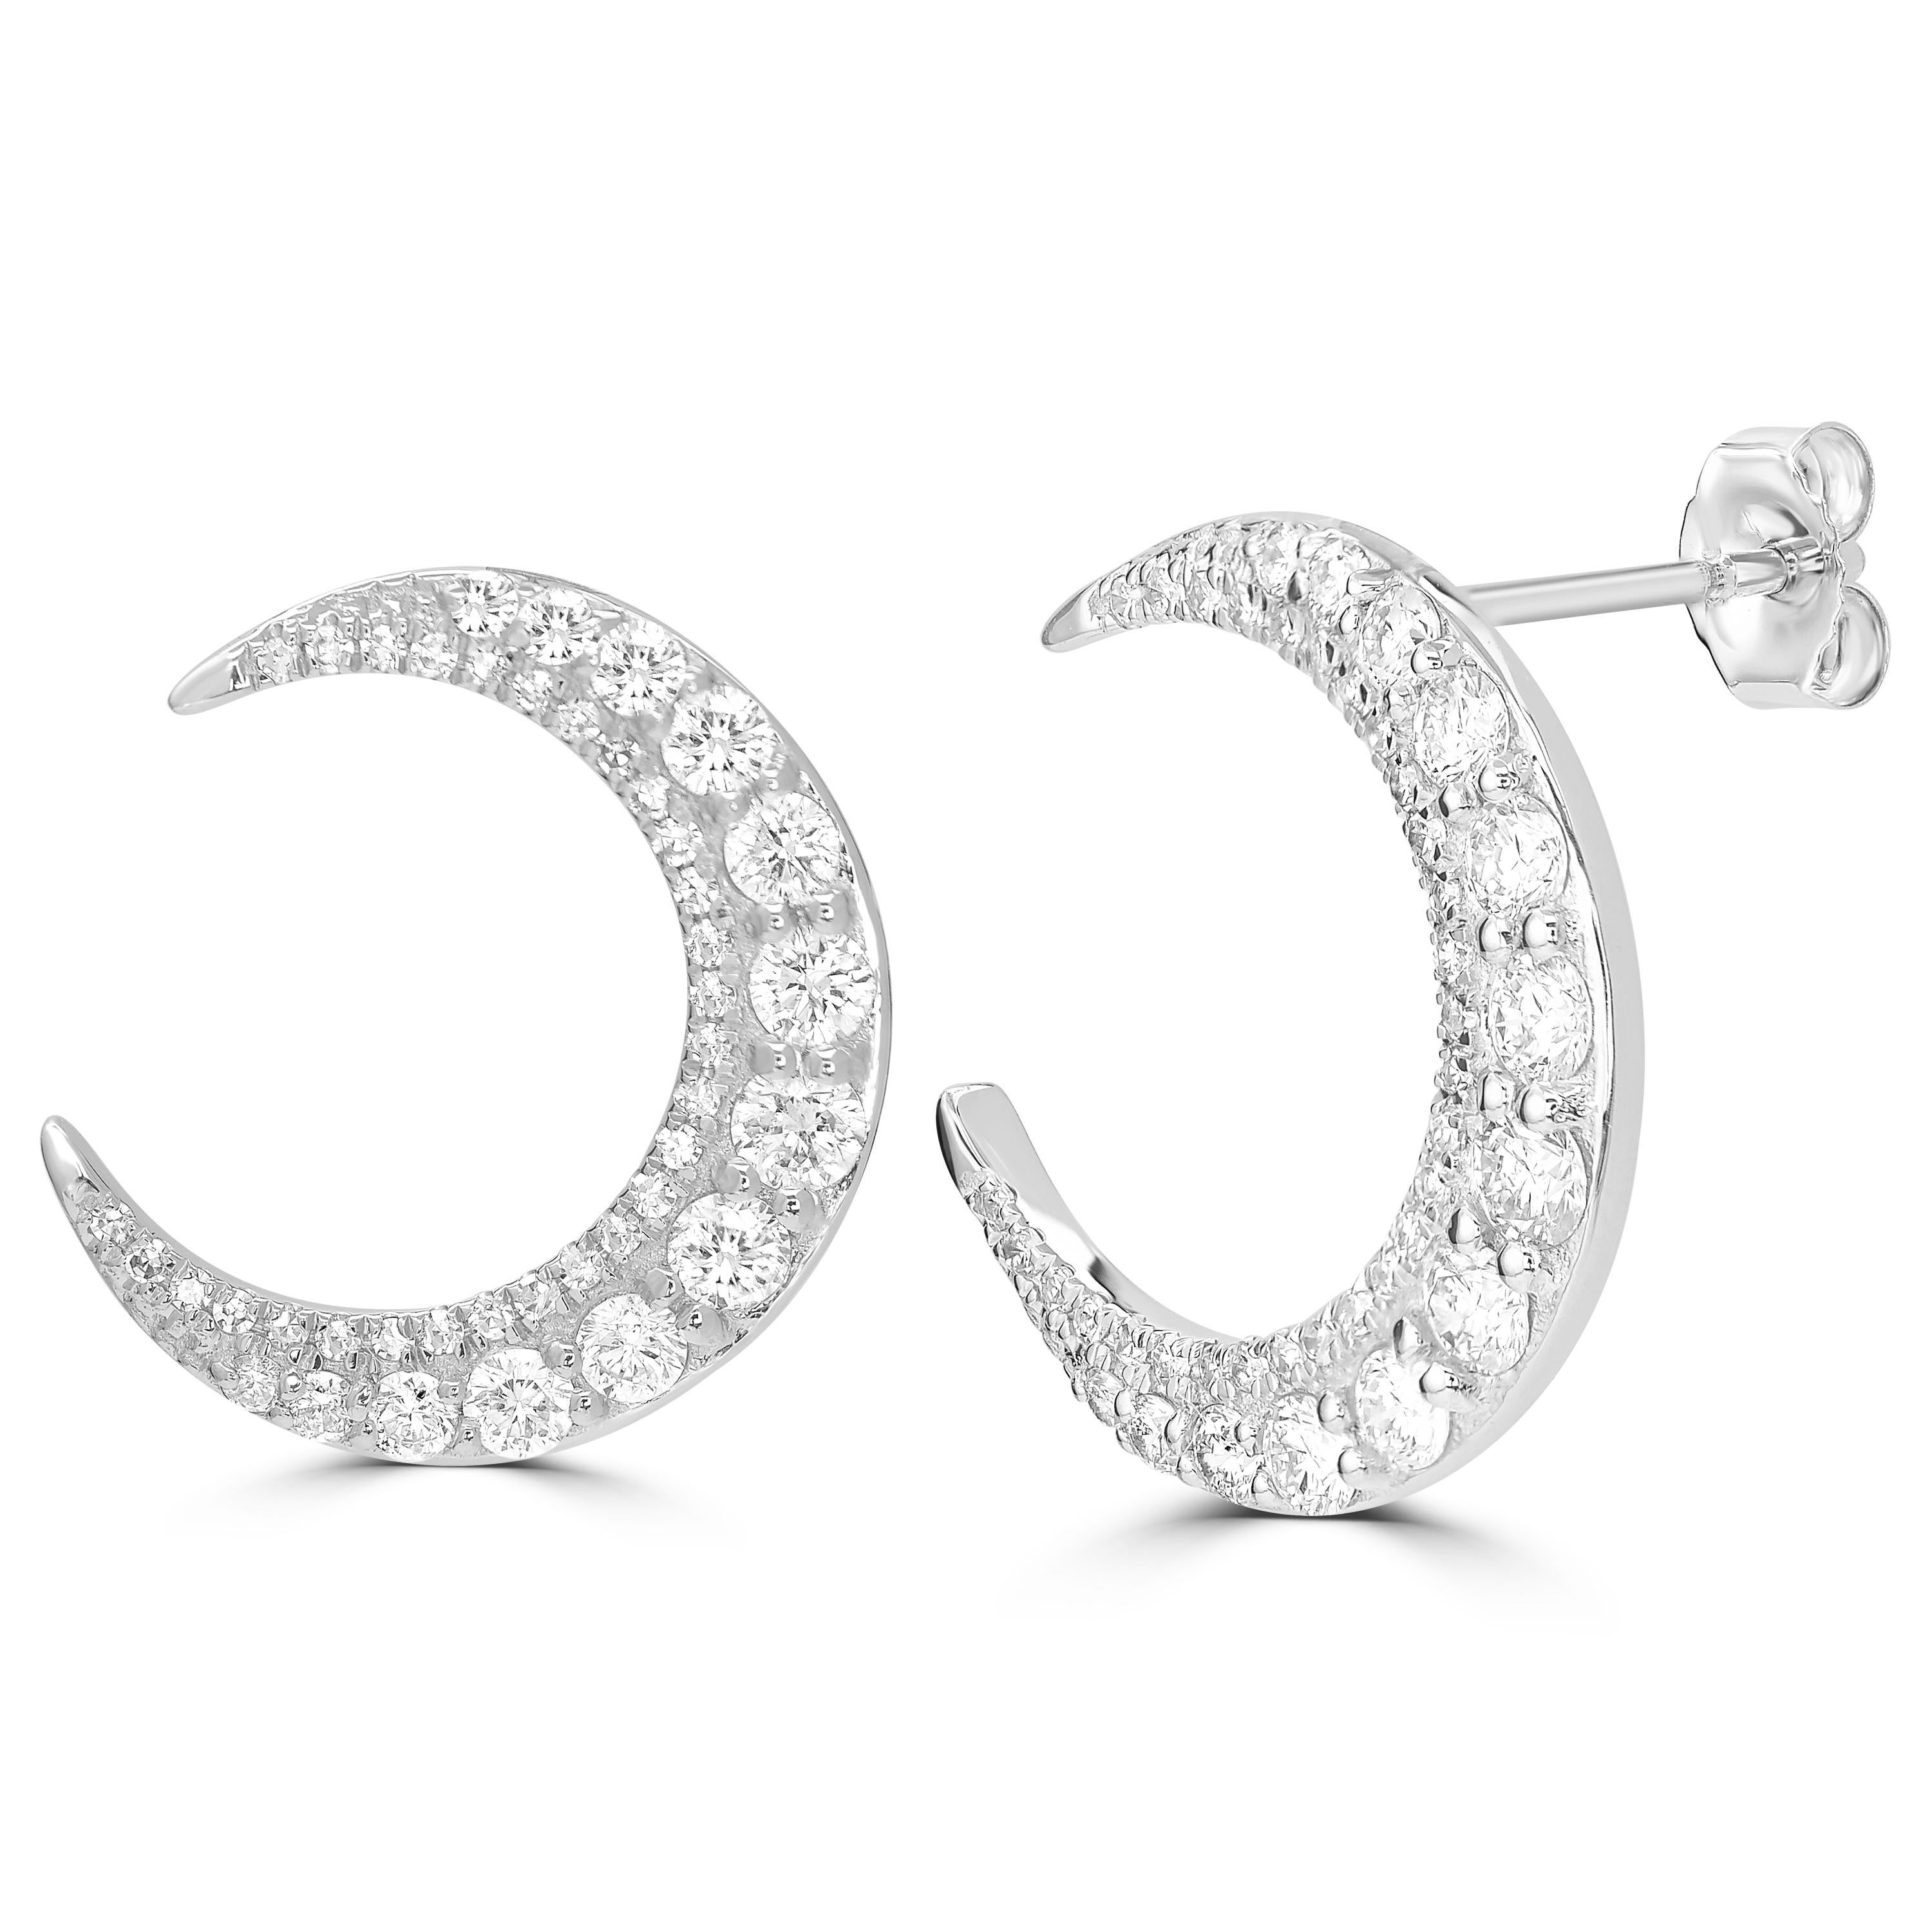 Luxle 14k White Gold Round Diamond Crescent Moon Stud Earrings, 0.88 Ct. T.W. These genuine diamond moon earrings will capture cosmic style. A magnificent piece made of 14k gold and set with 84 round full-cut diamonds. The diamonds have a GH color